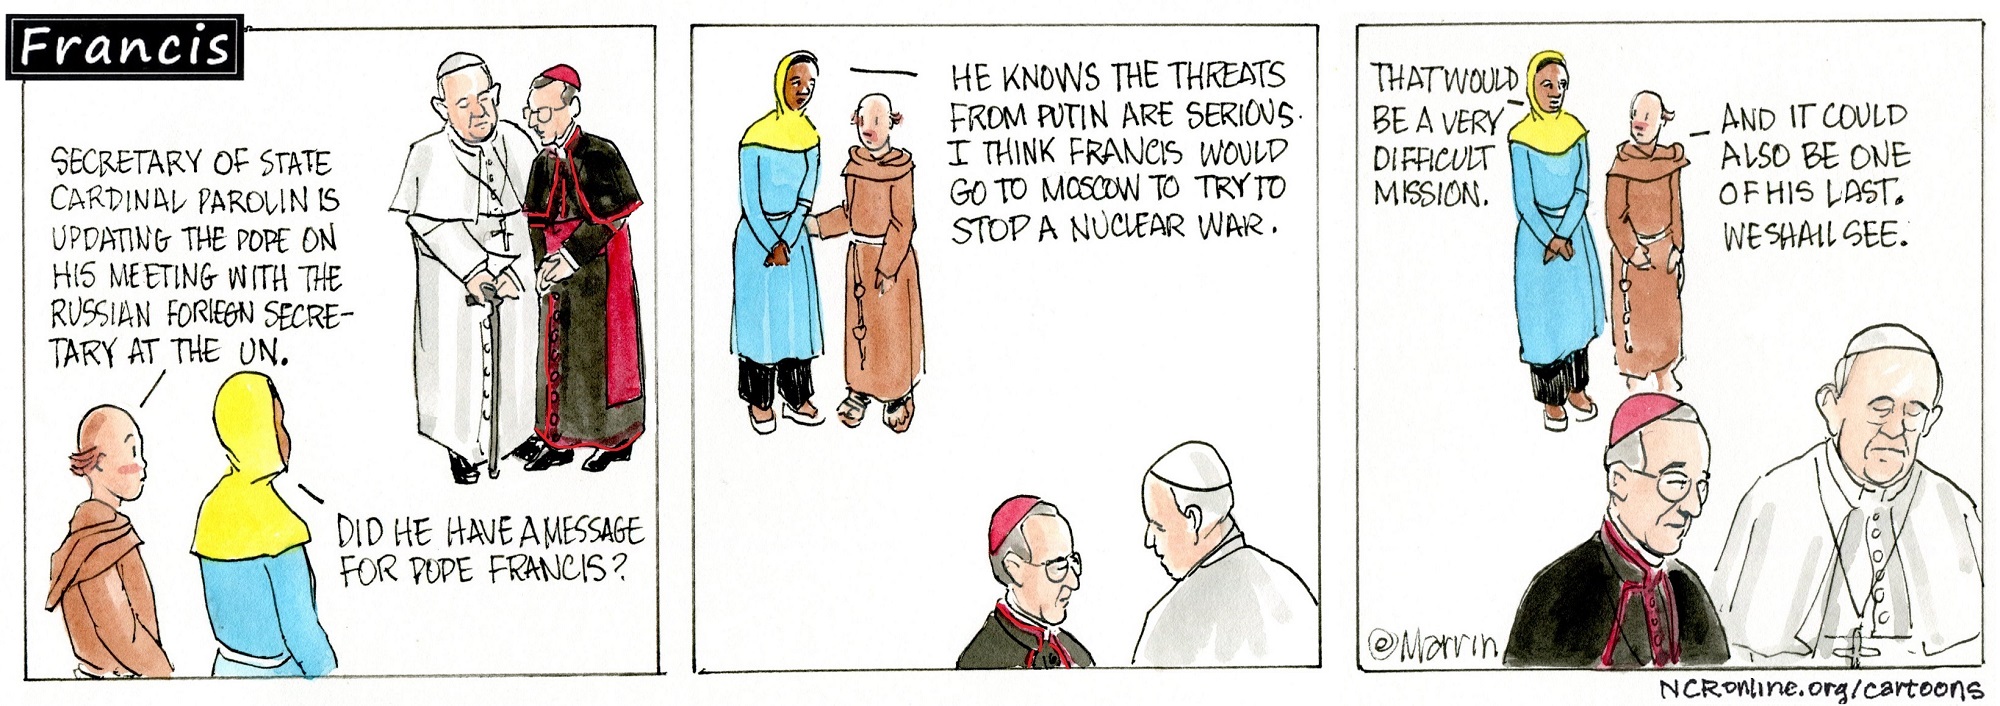 Francis, the comic strip: Putin's threats are serious. What will Francis do to stop a nuclear war?